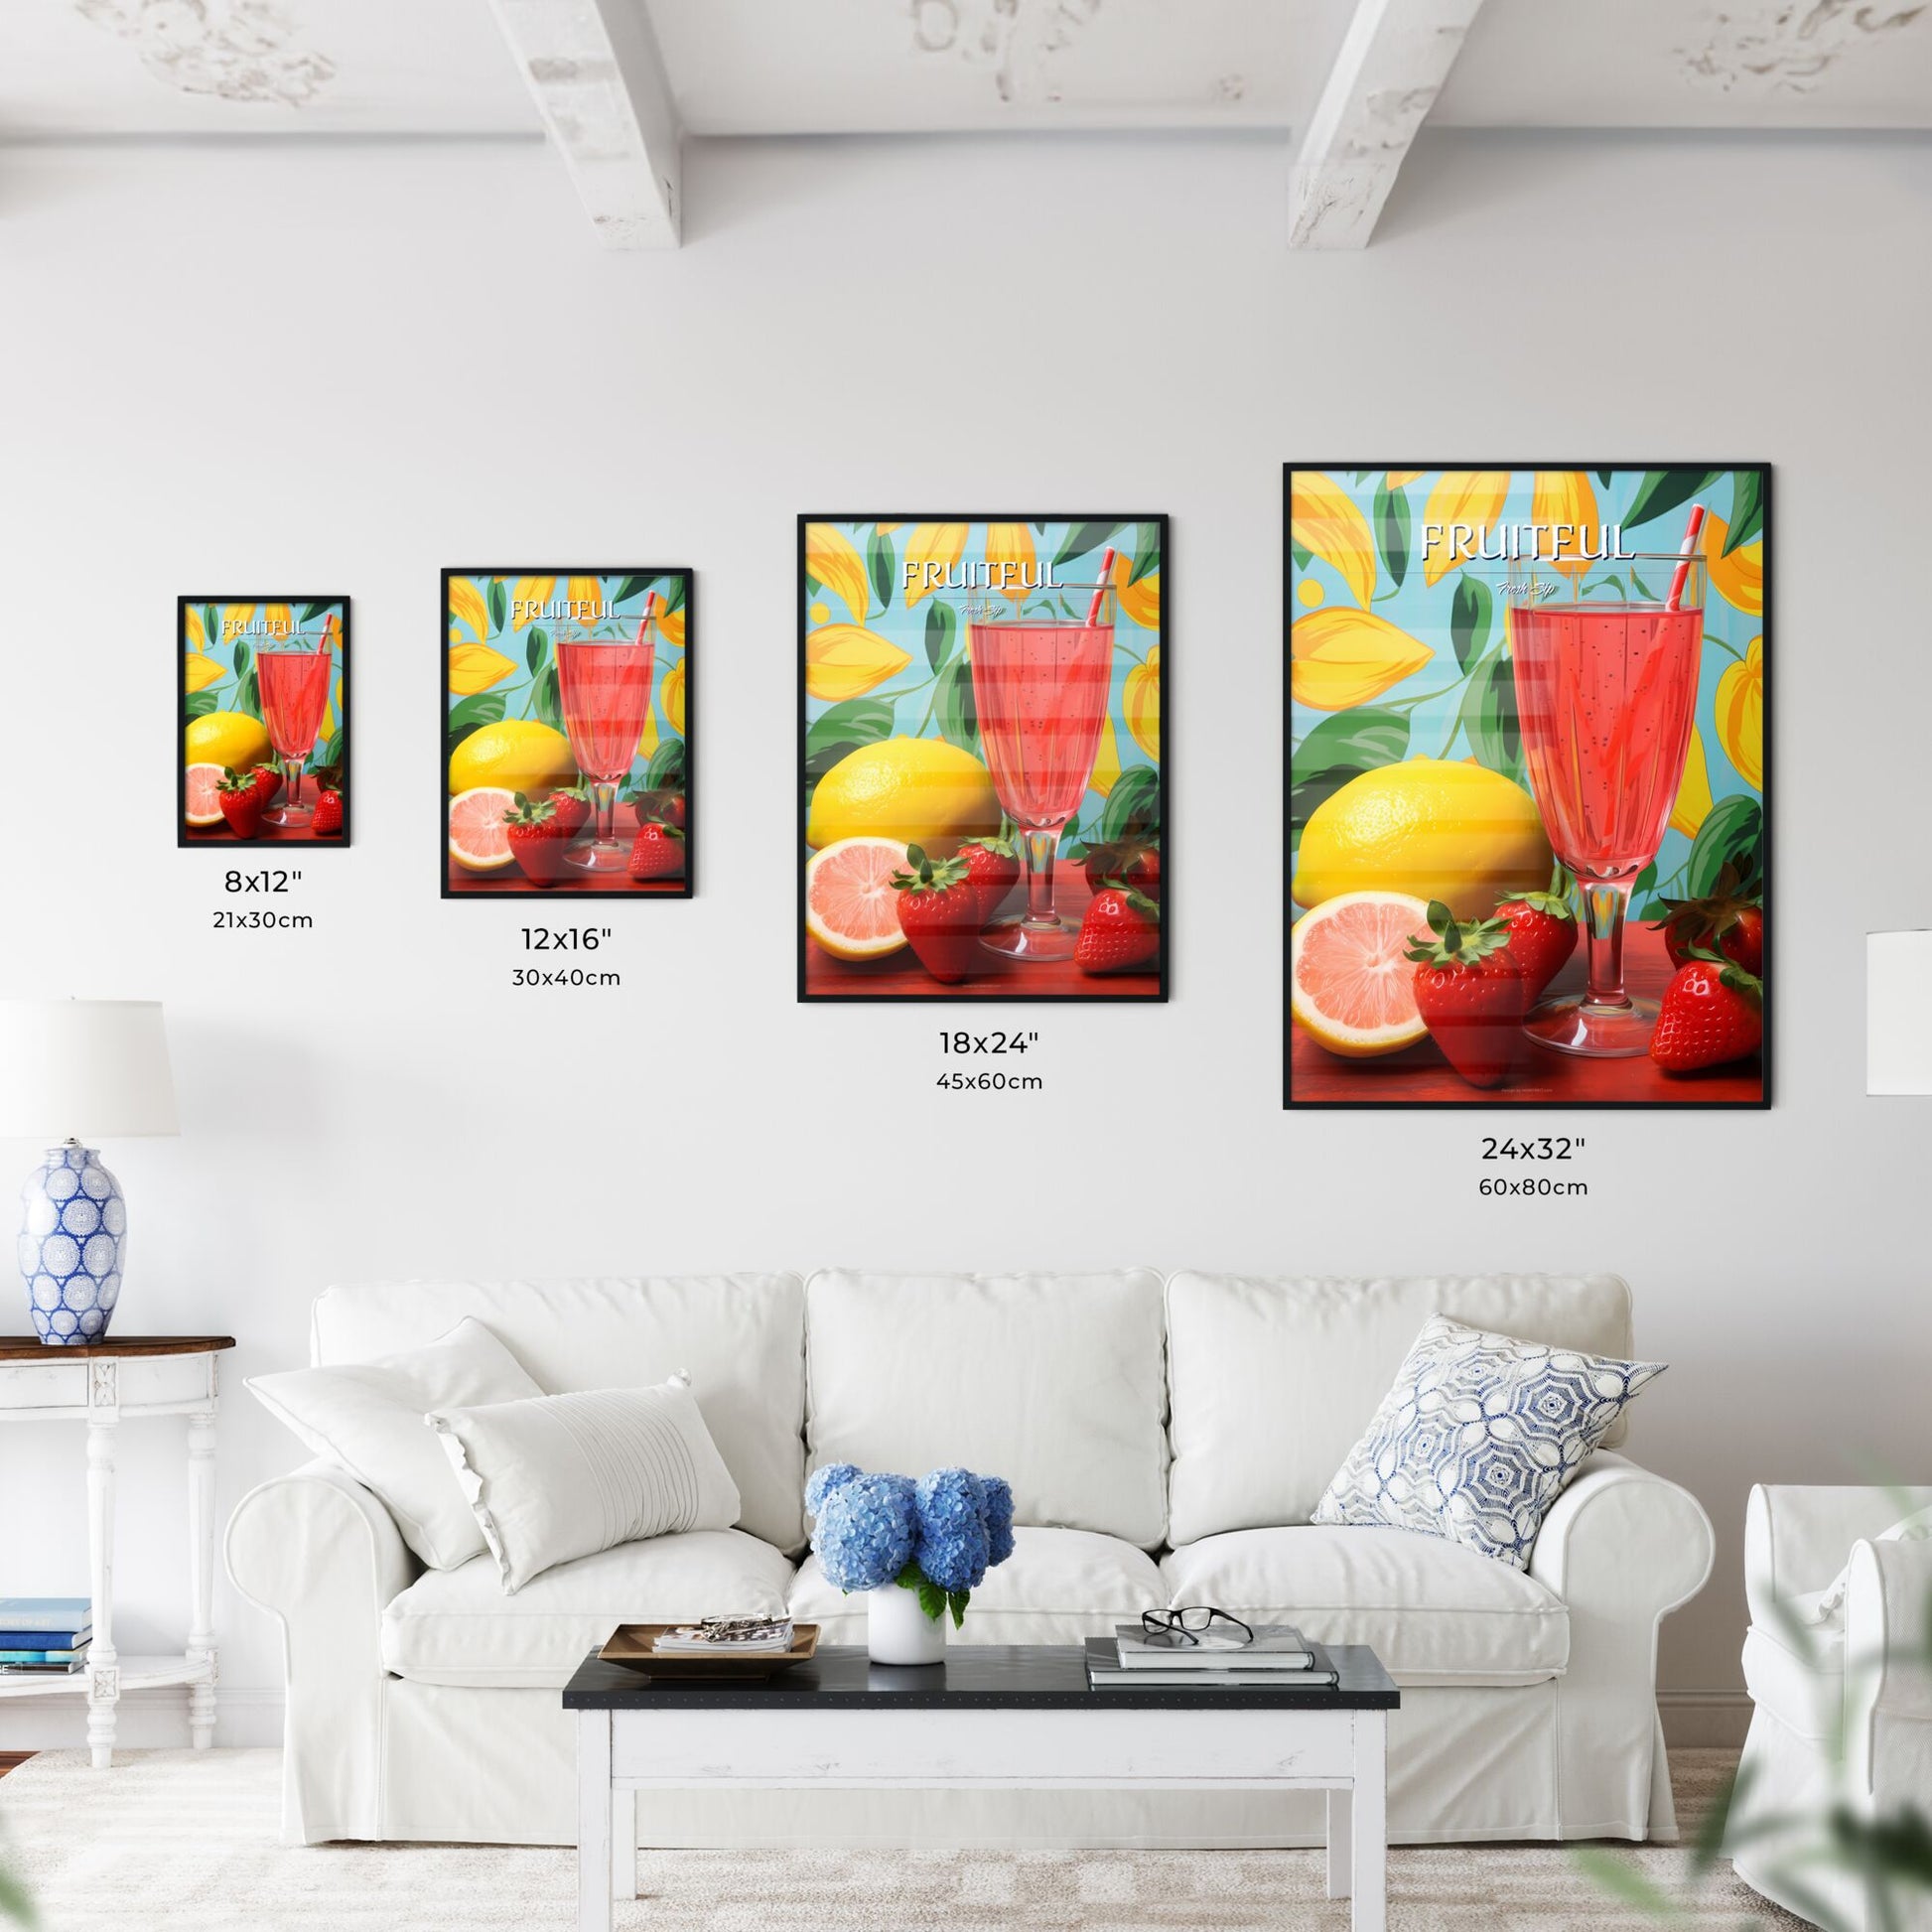 Glass Of Pink Drink With Straw Next To Strawberries And Lemons Art Print Default Title